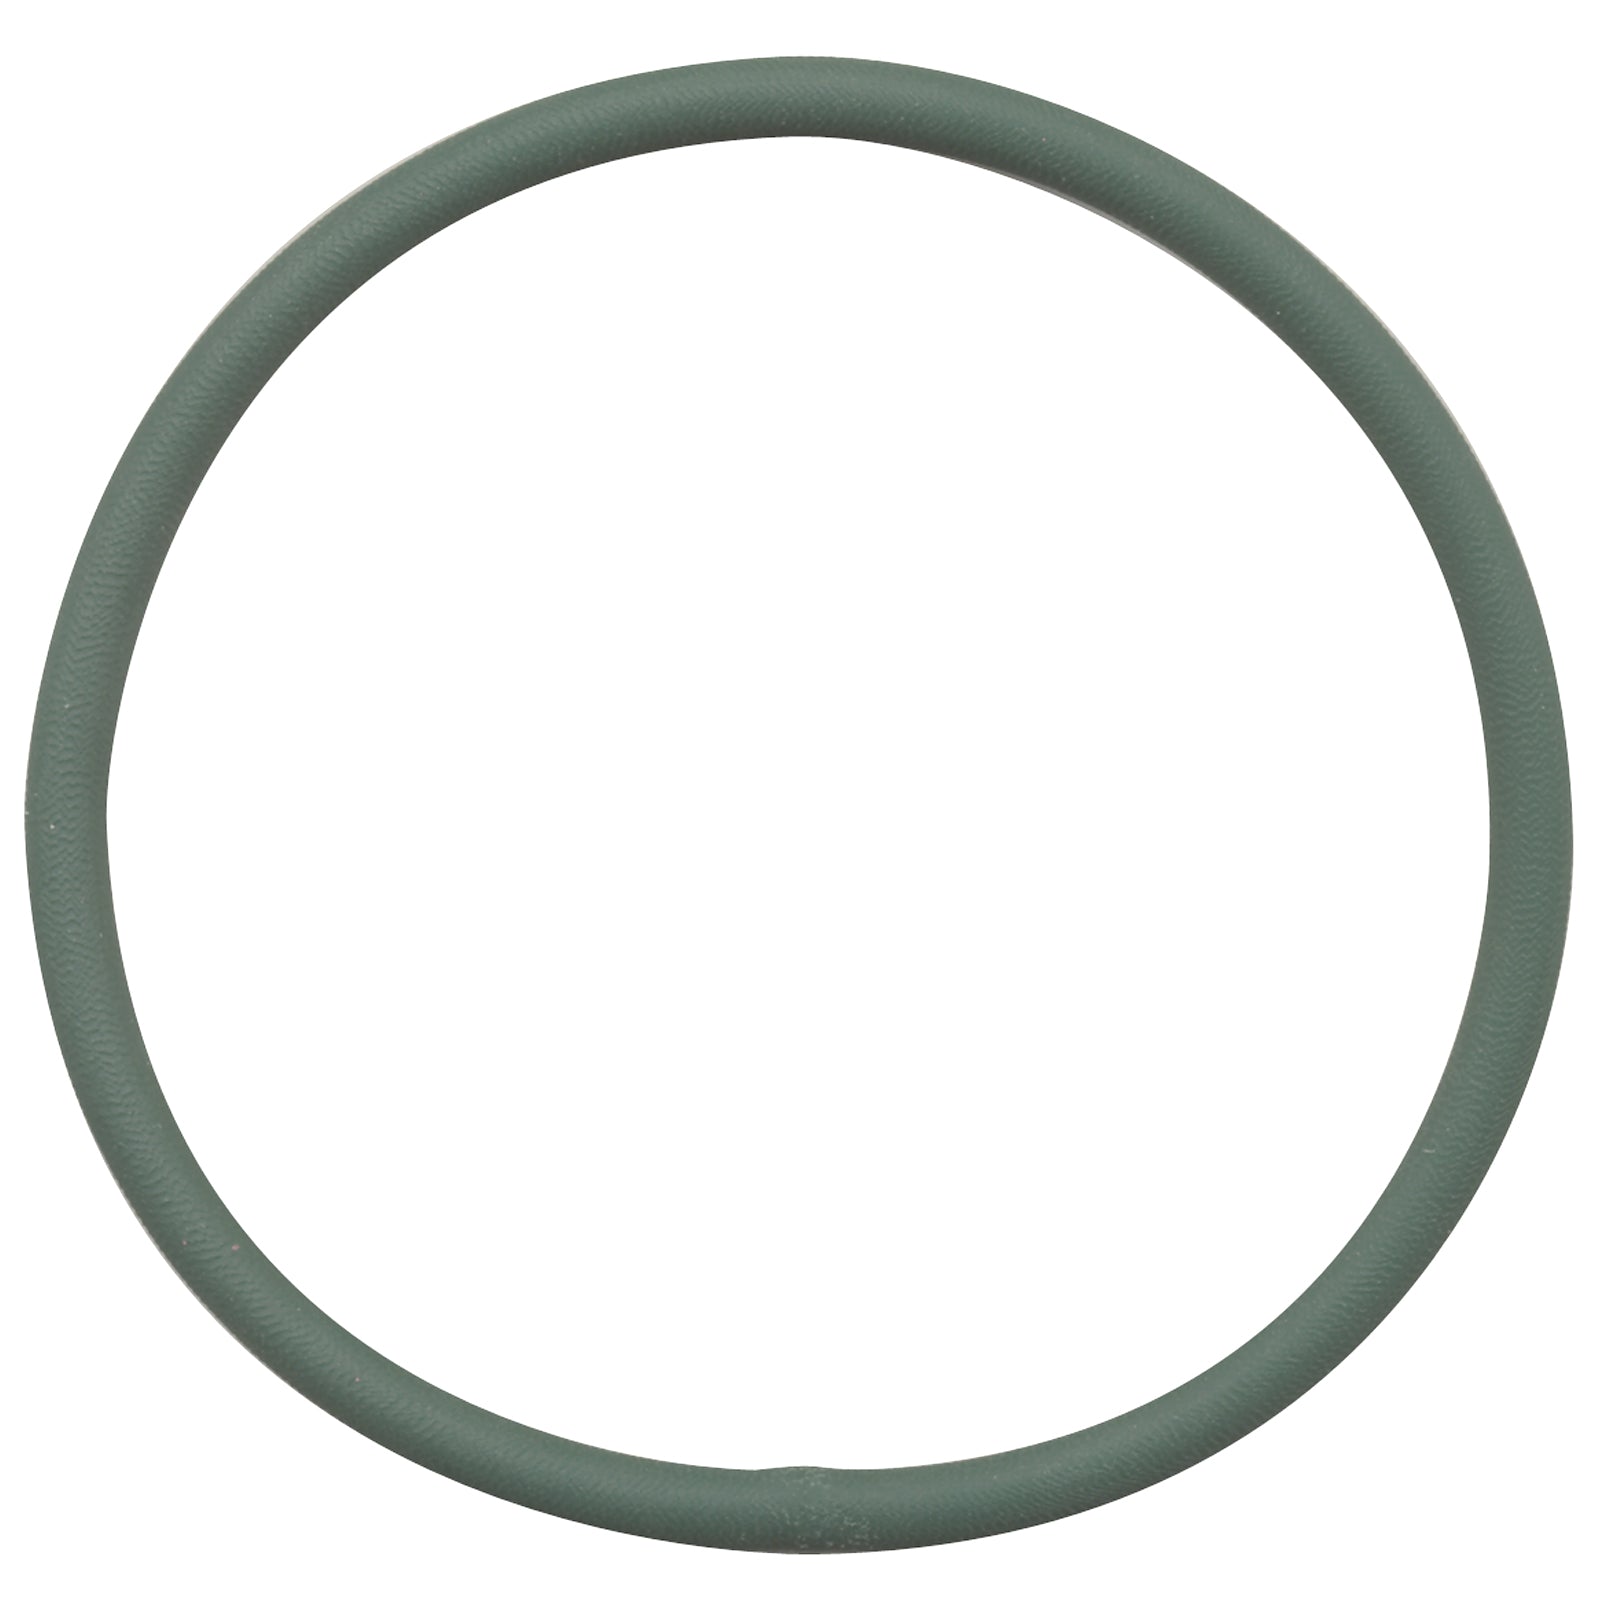 Extra Drive Belt for #82959 Variable Speed Drill Press